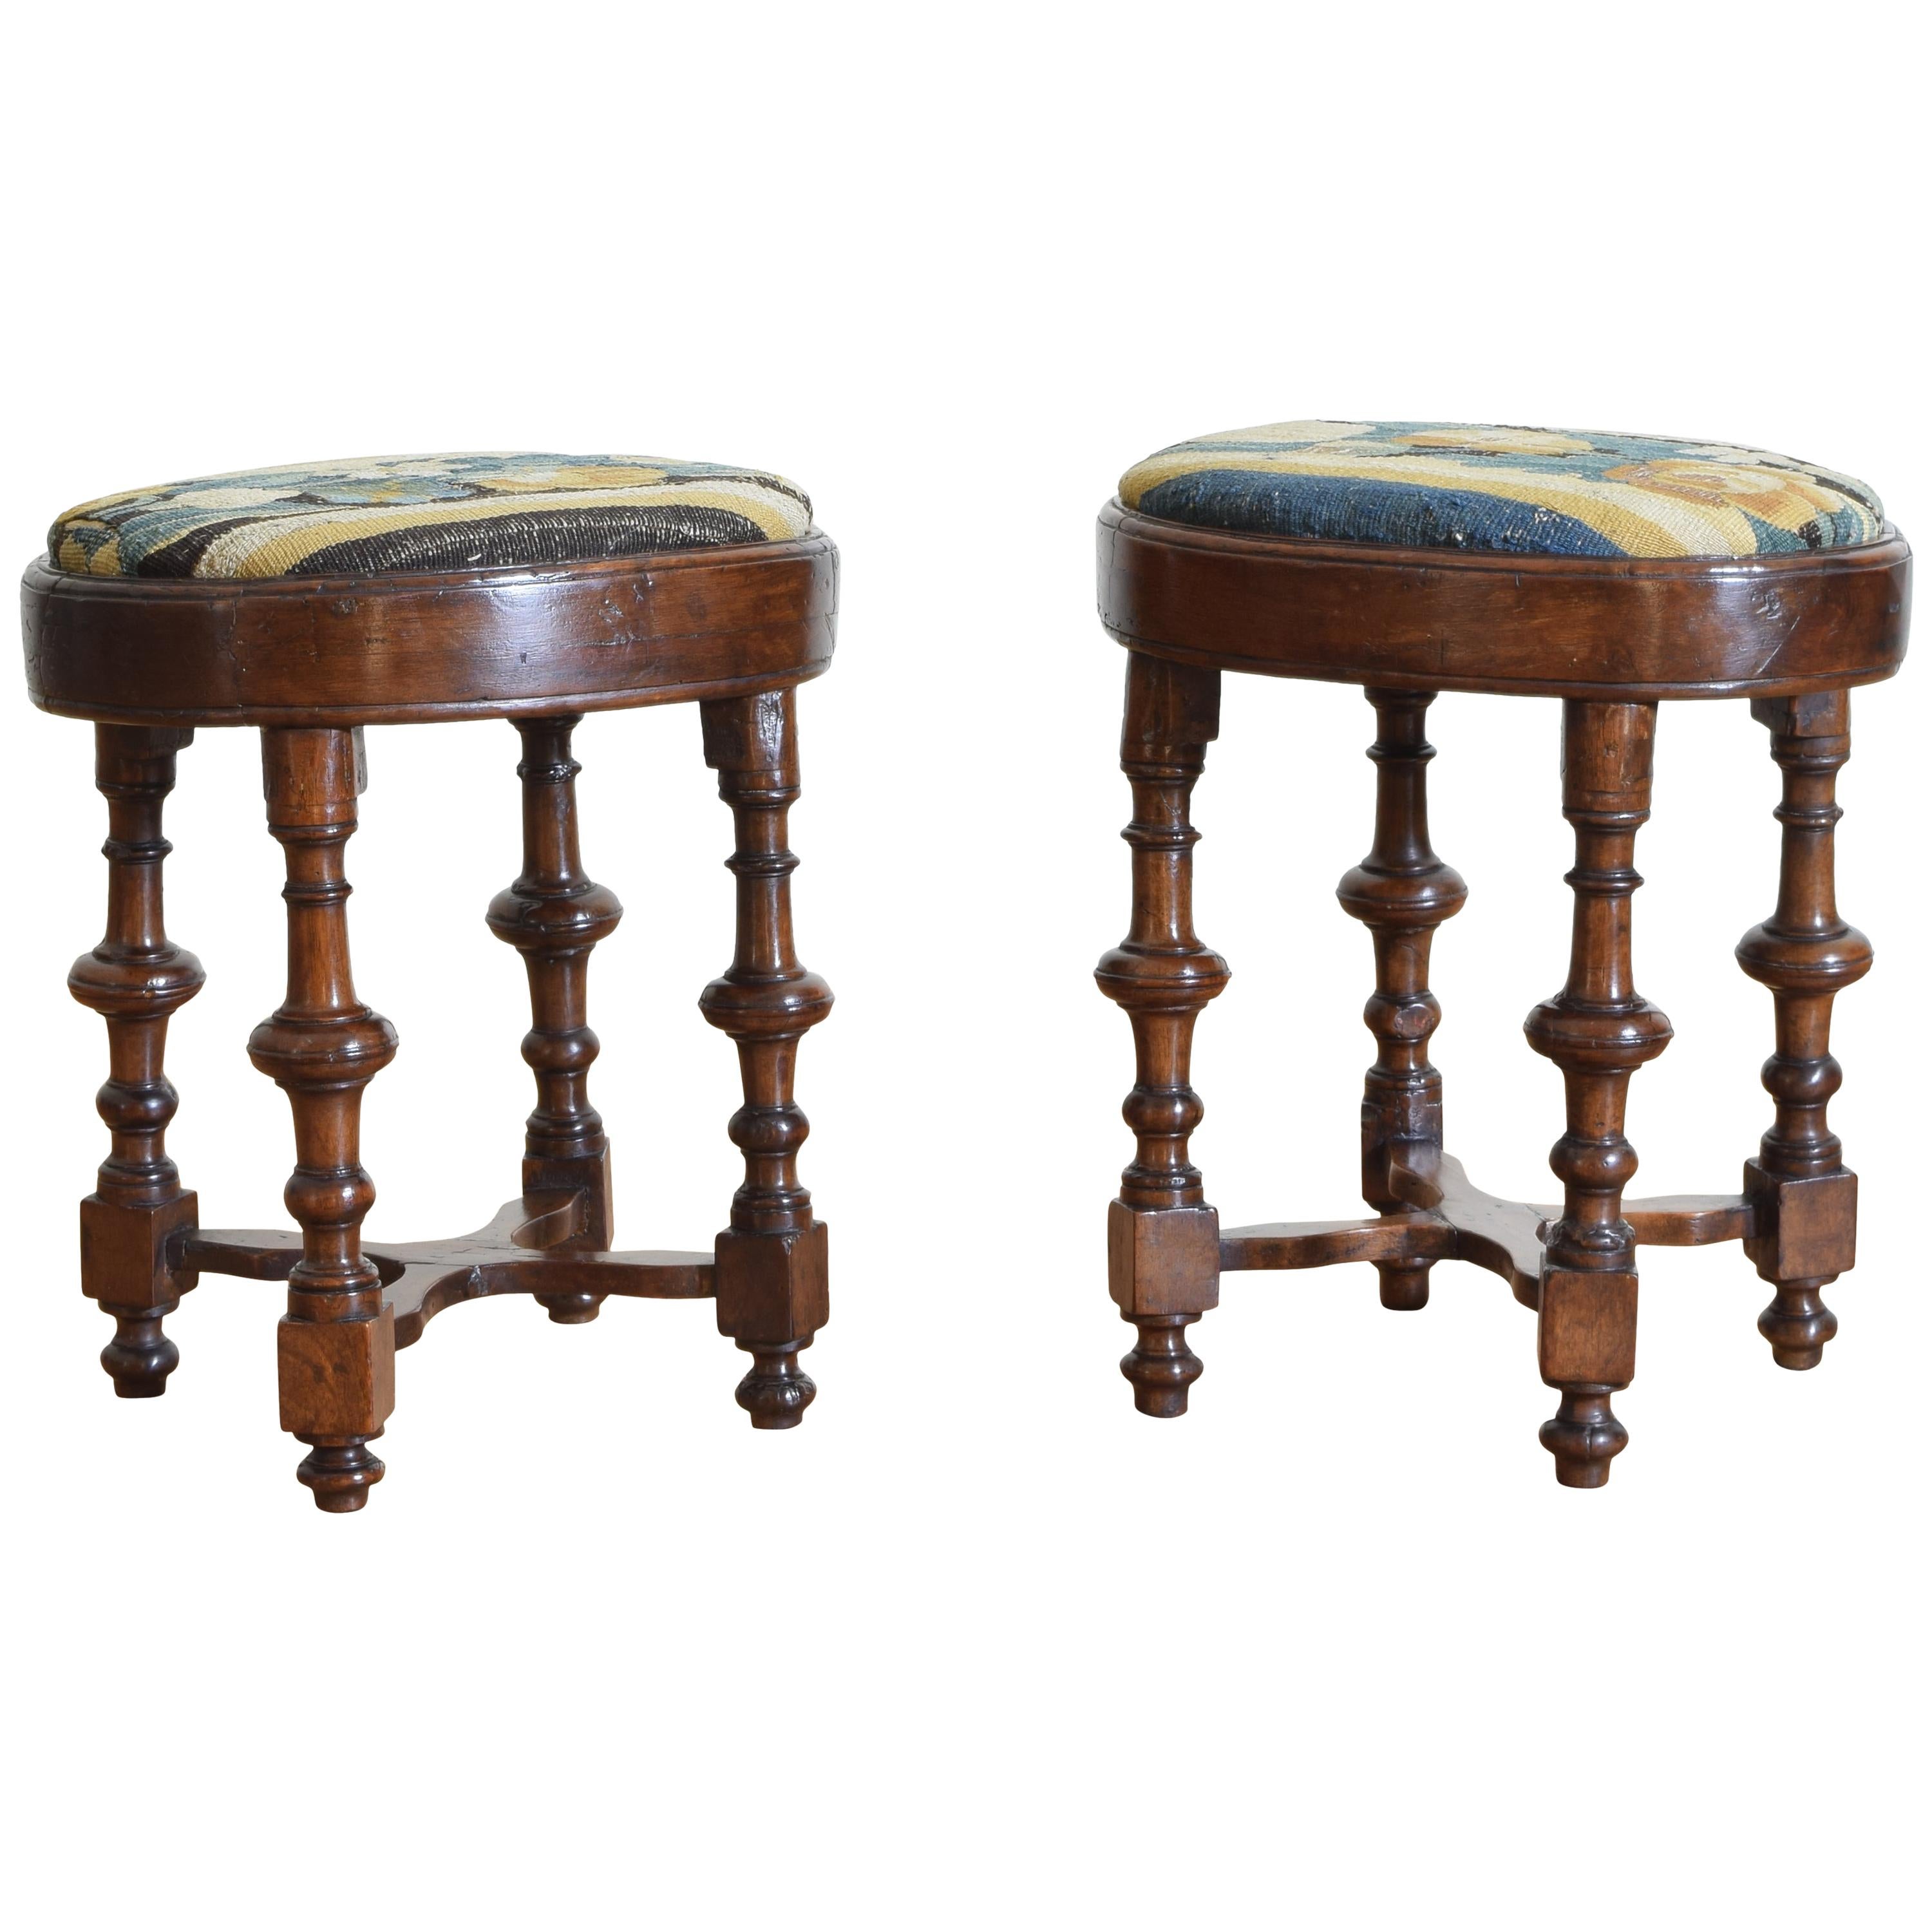 Pair of Italian Walnut and Tapestry Upholstered Footstools, Early 18th Century